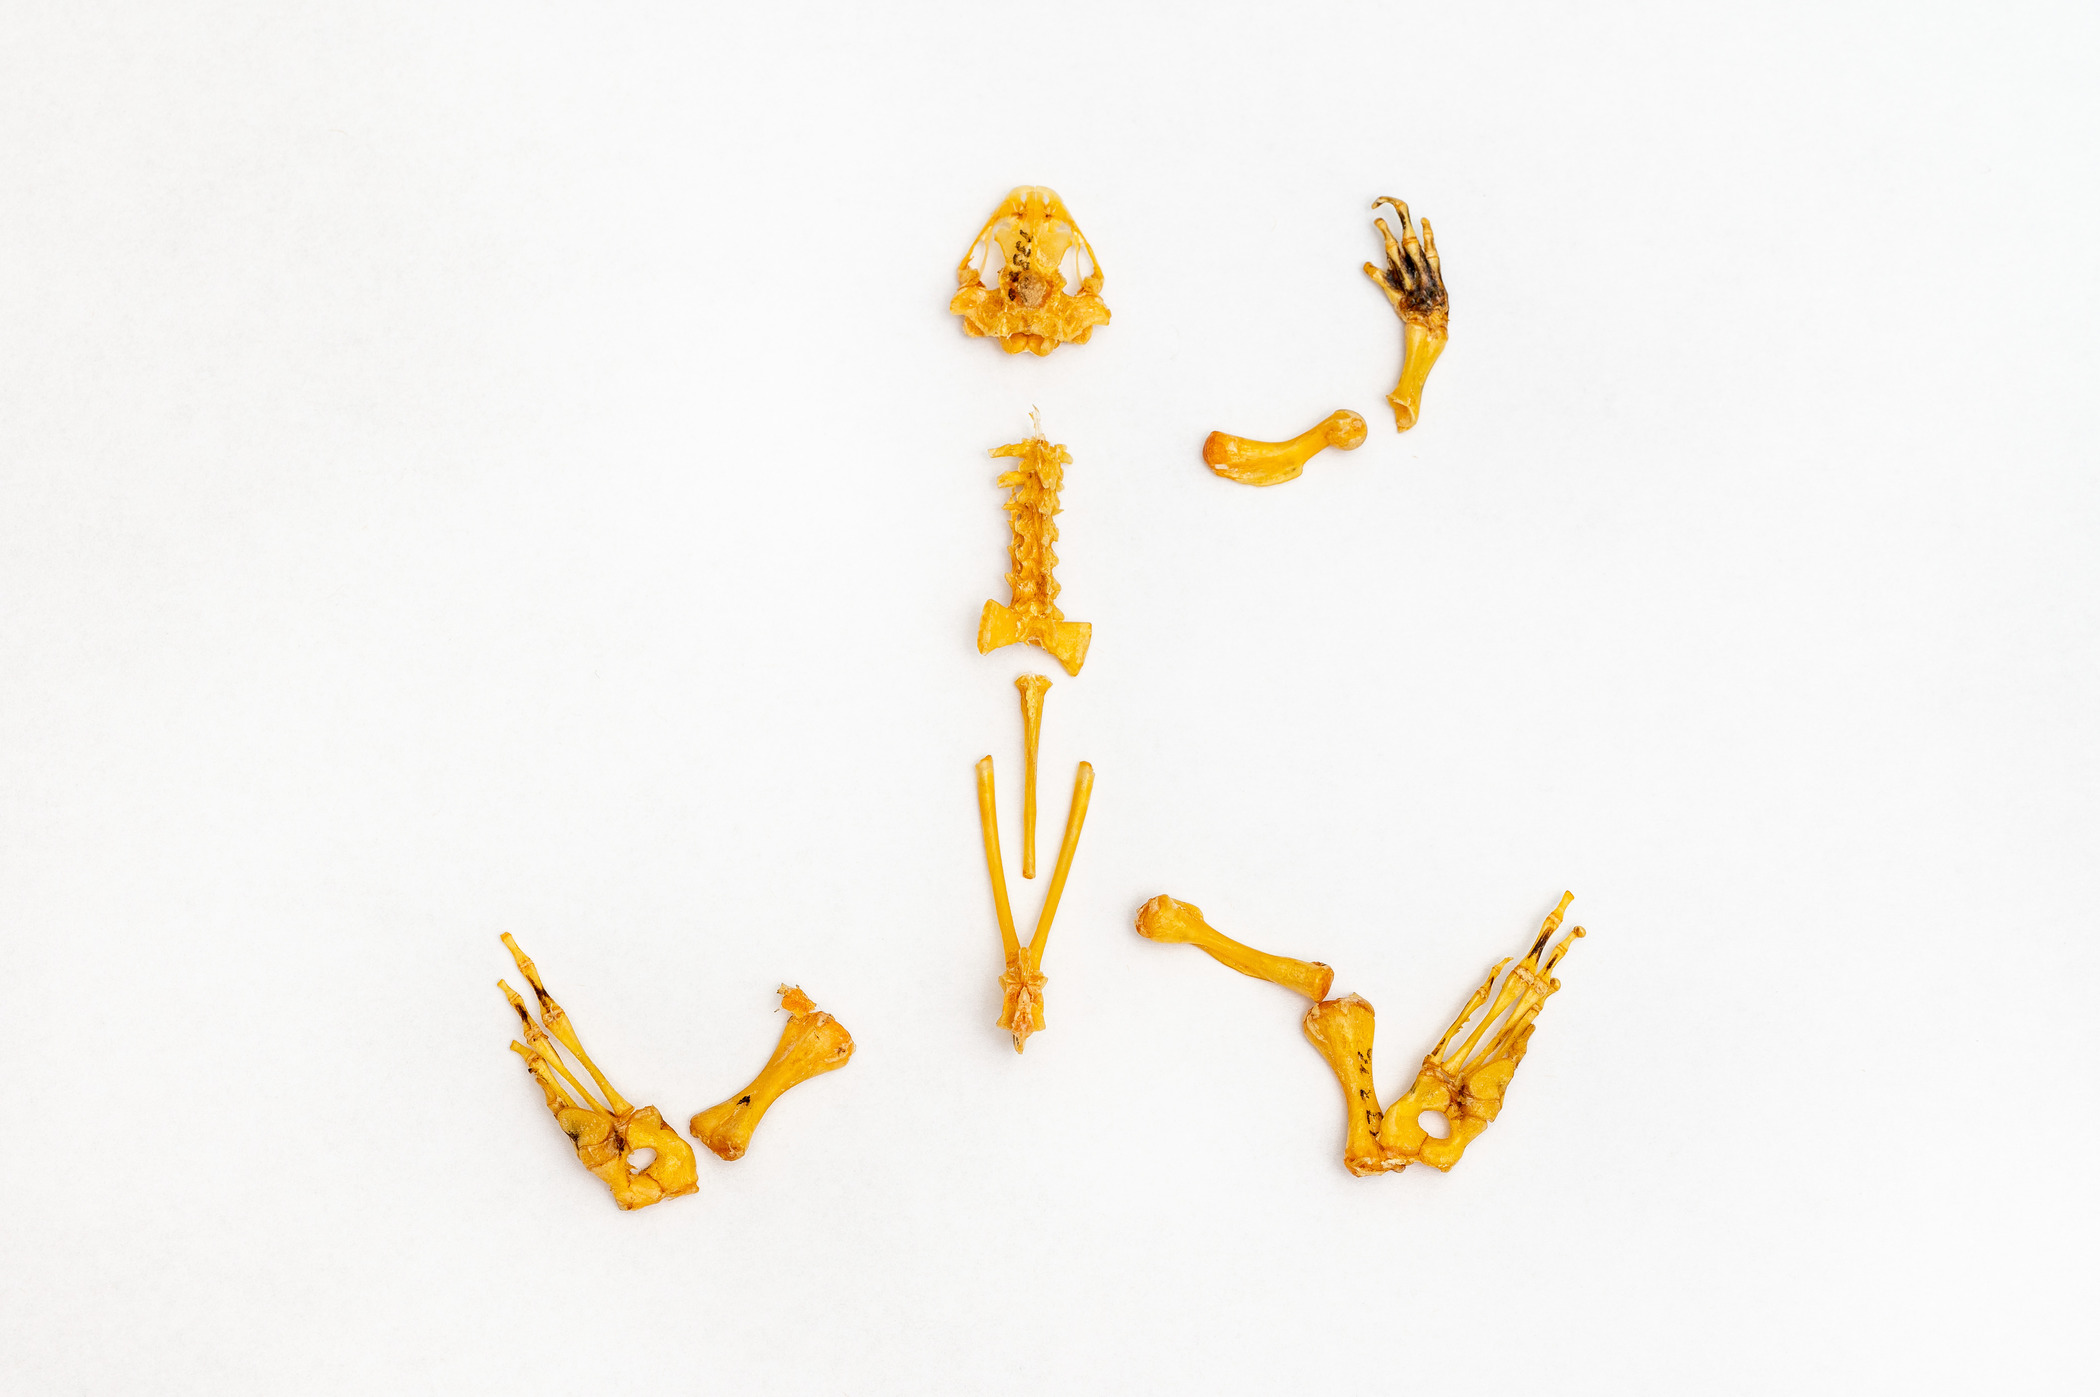 A partial frog skeleton photographed from above against a white background. There are parts of the skull, spine, pelvis, one front leg, and two back legs.